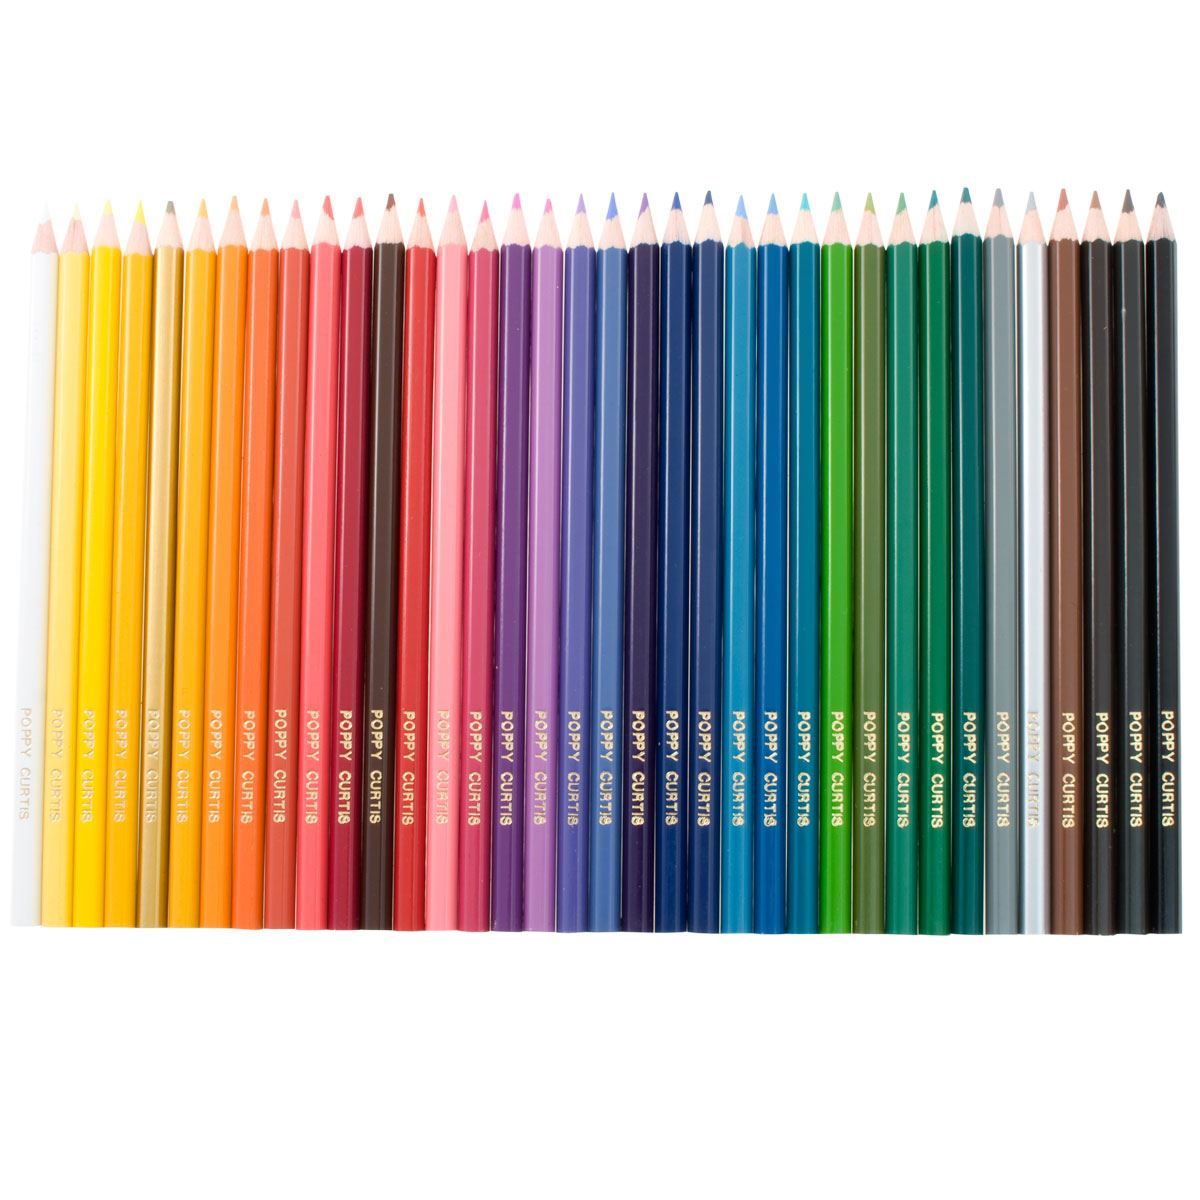 https://www.mulberrybush.co.uk/images/thumbs/0006212_36-personalised-colouring-pencils.jpeg